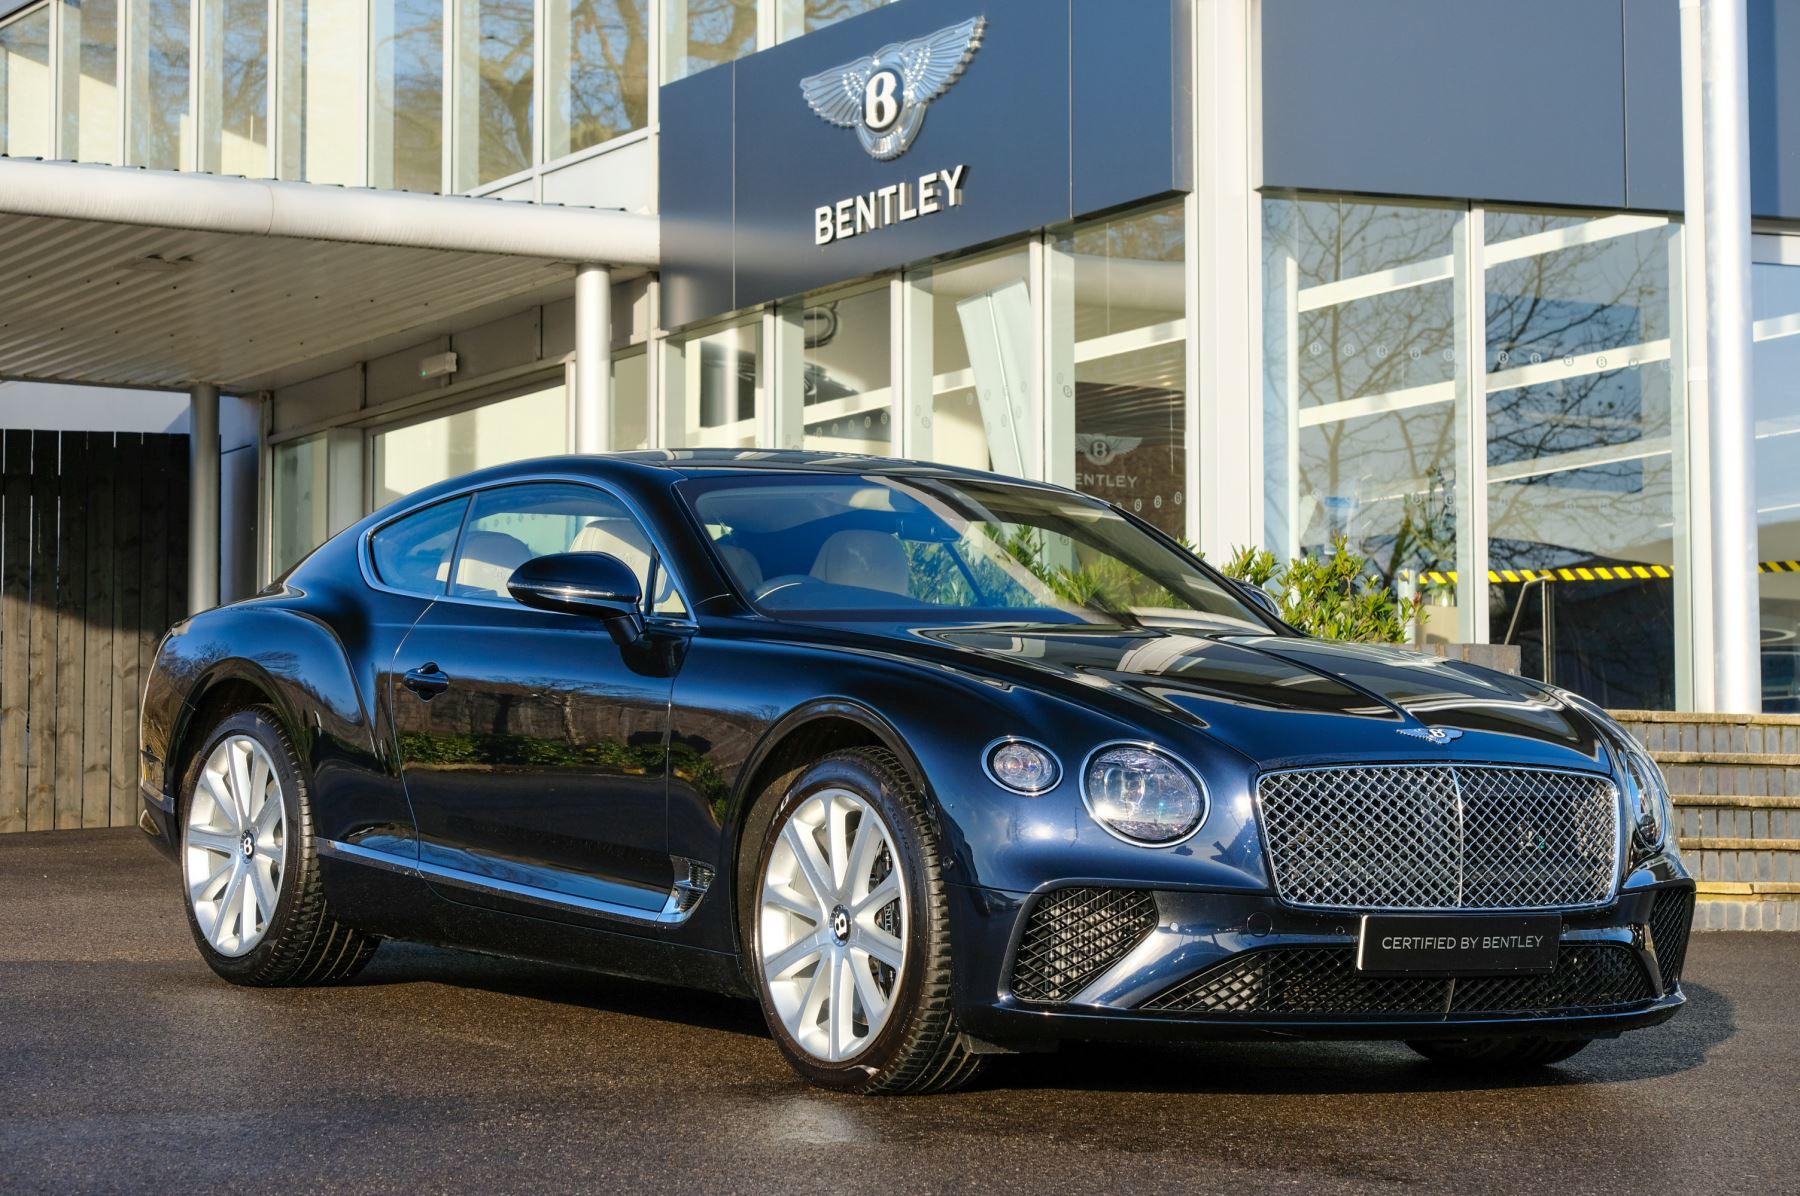 Bentley recorded record sales last year despite the pandemic